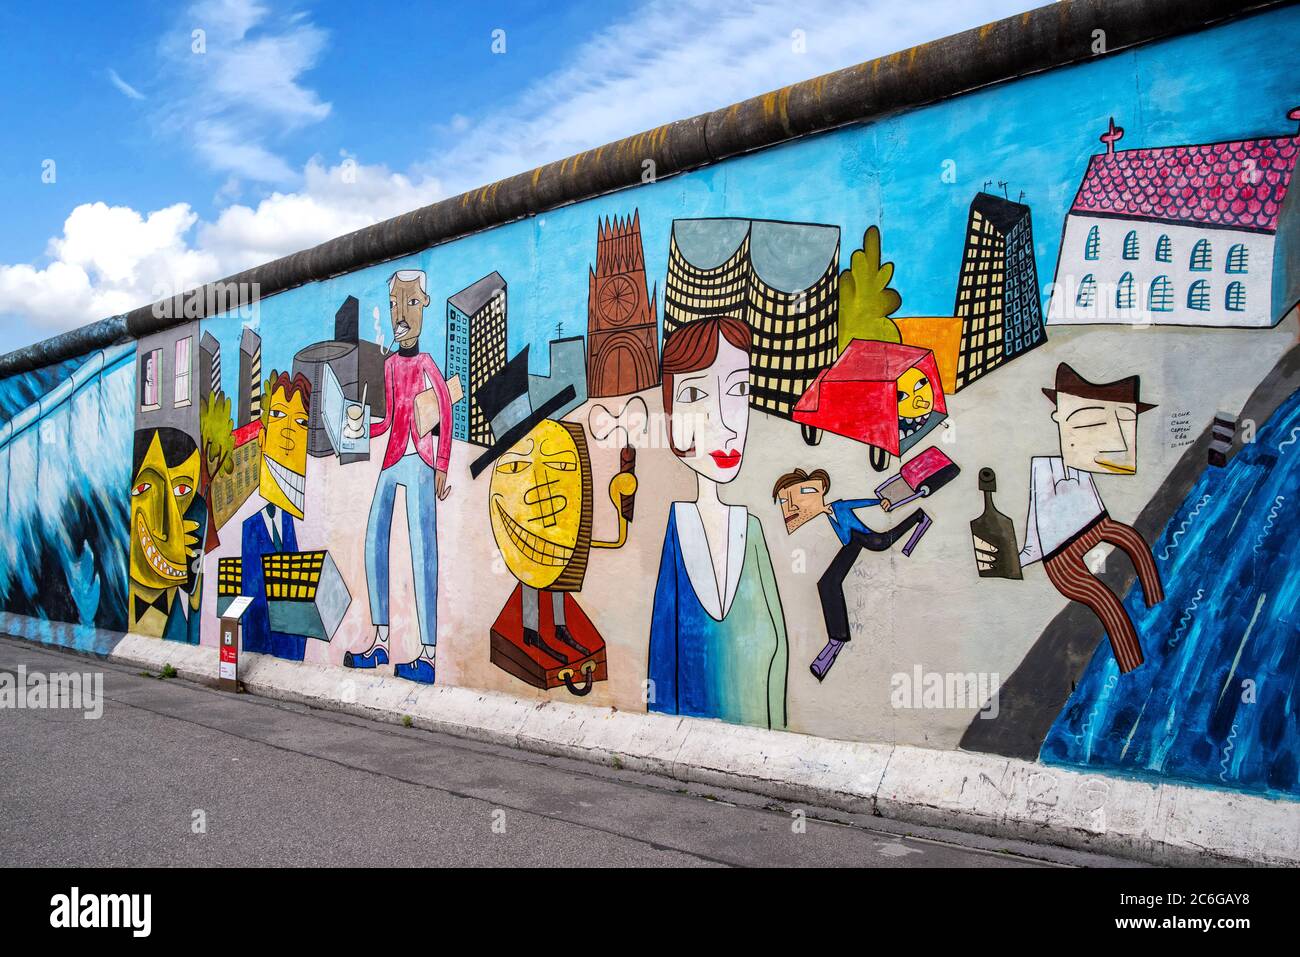 Berlin, Germany,06/14/2020: Berlin Wall Painting by Pop Art artist Jim Avignon who painted the East Side Gallery of the Berlin Wall in 1990 Stock Photo